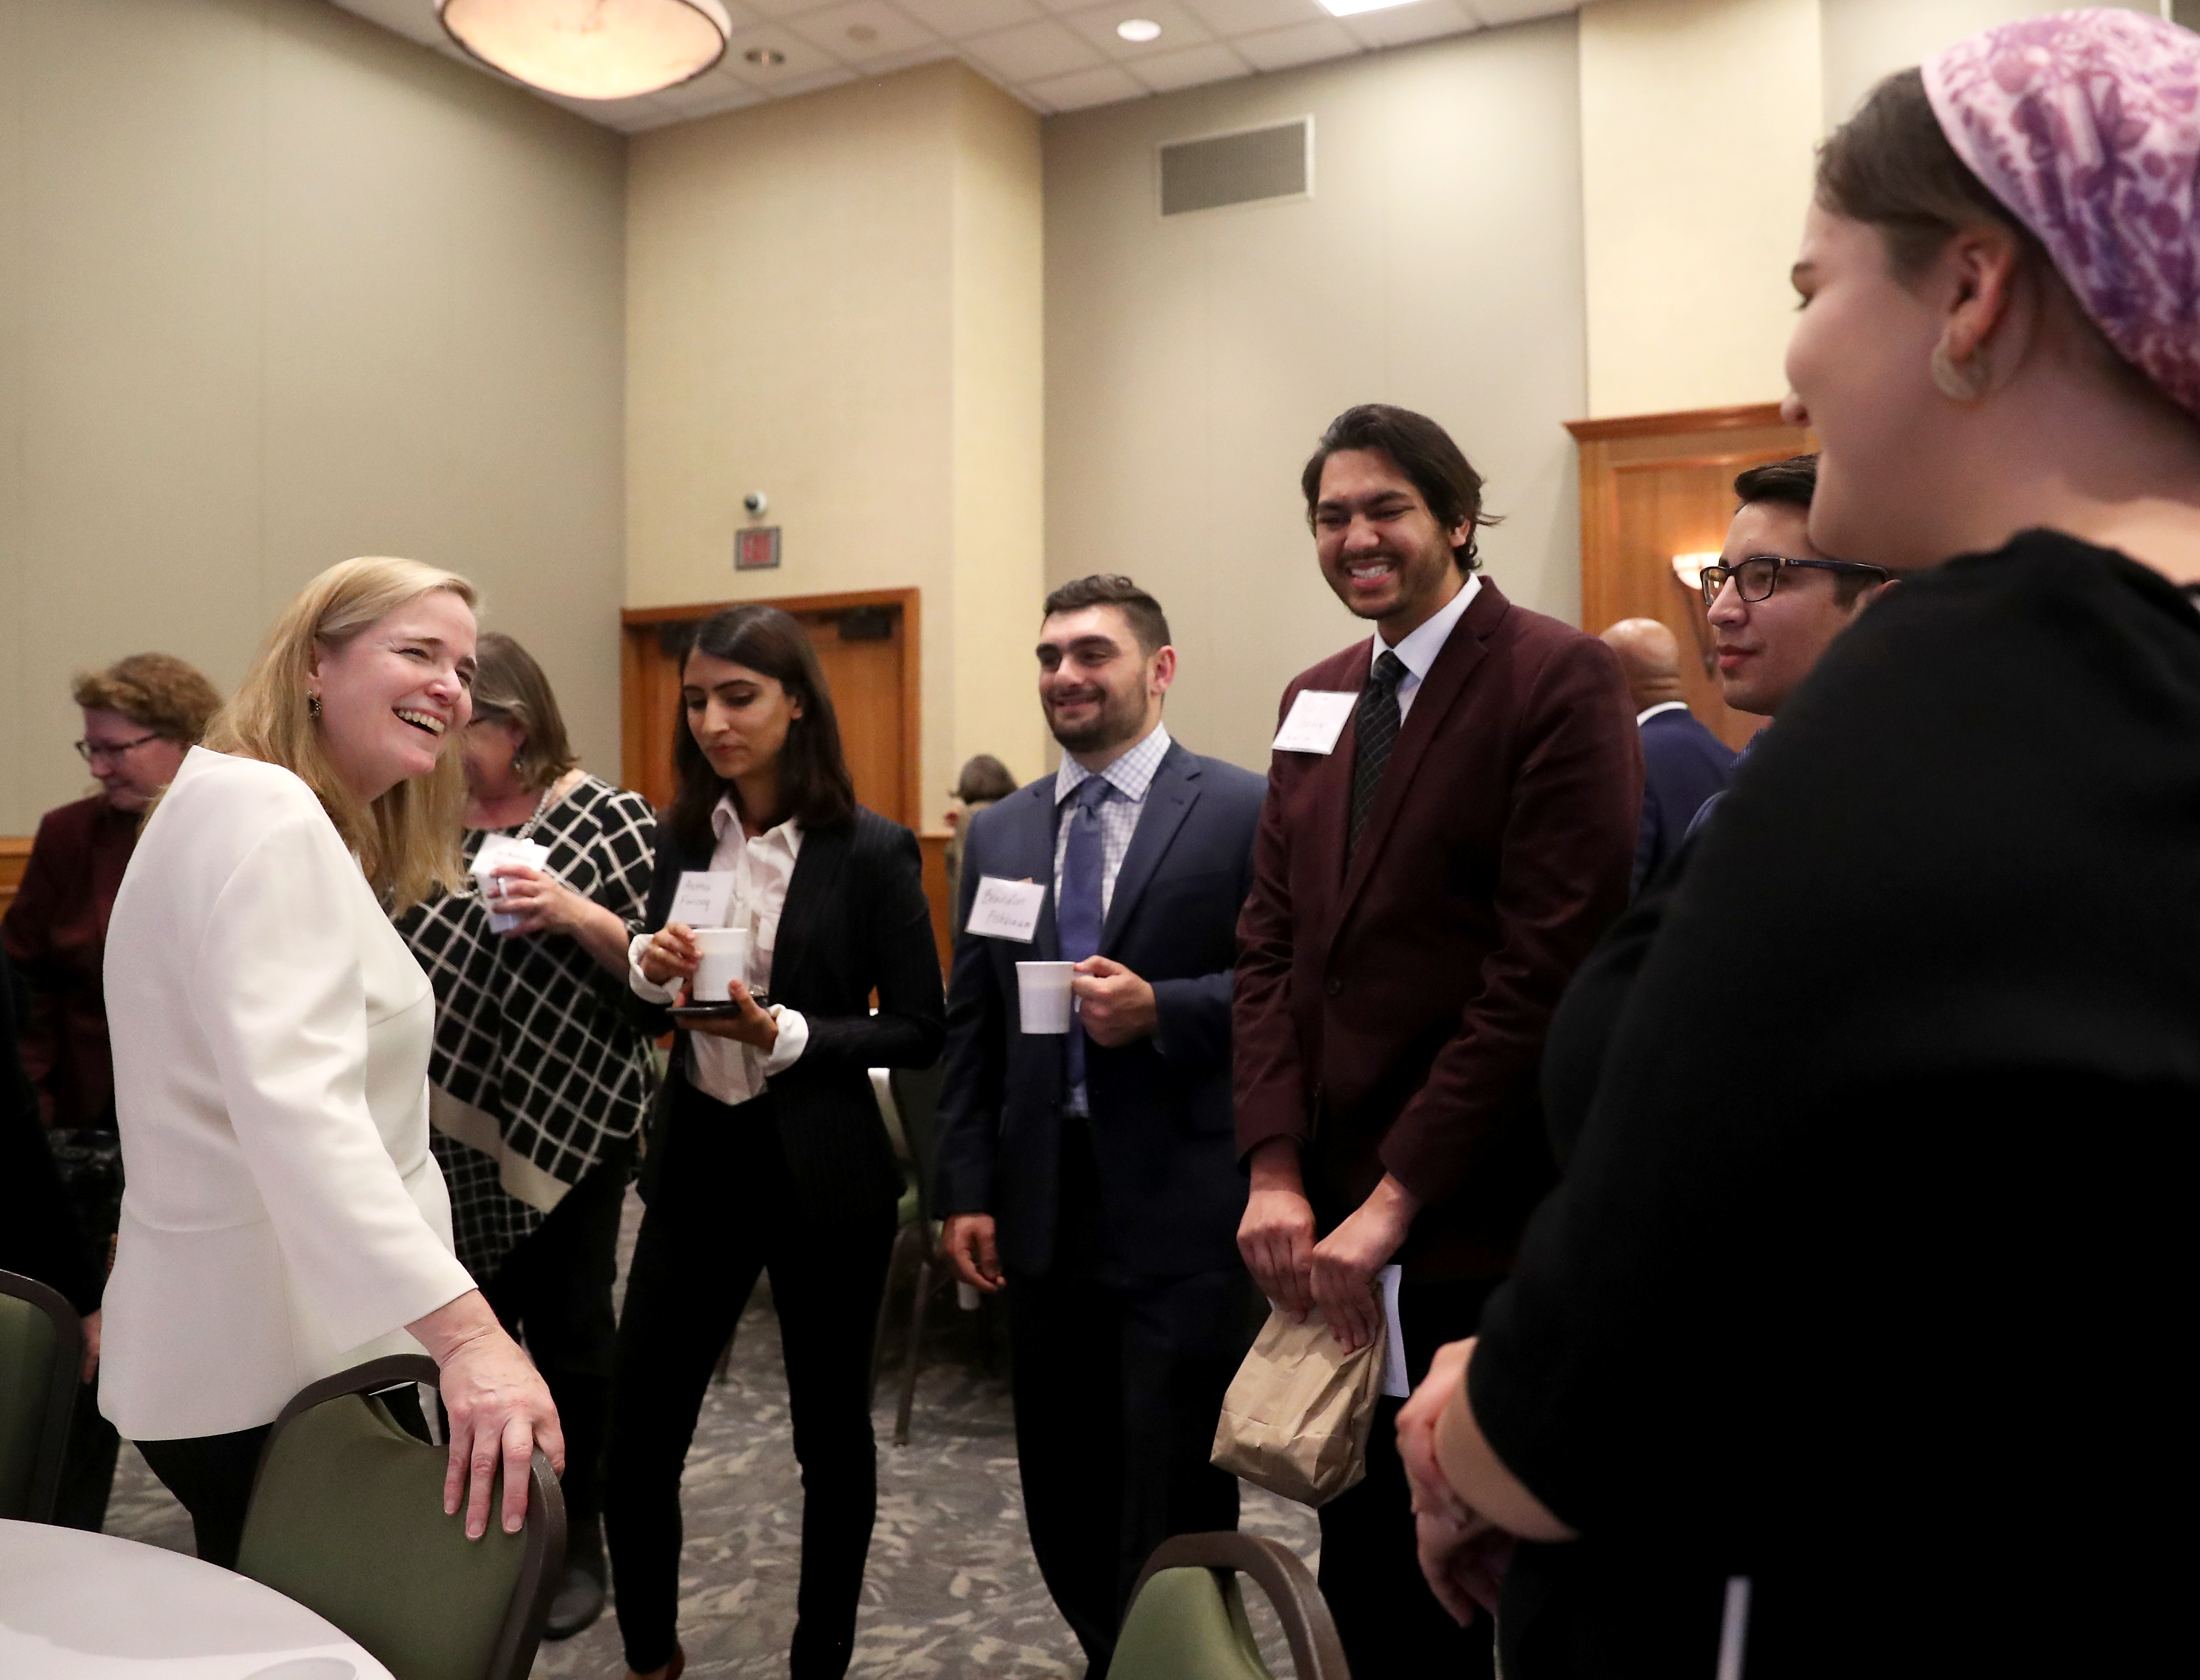 Honoree Susan L. Burke talks with Rutgers Law students.